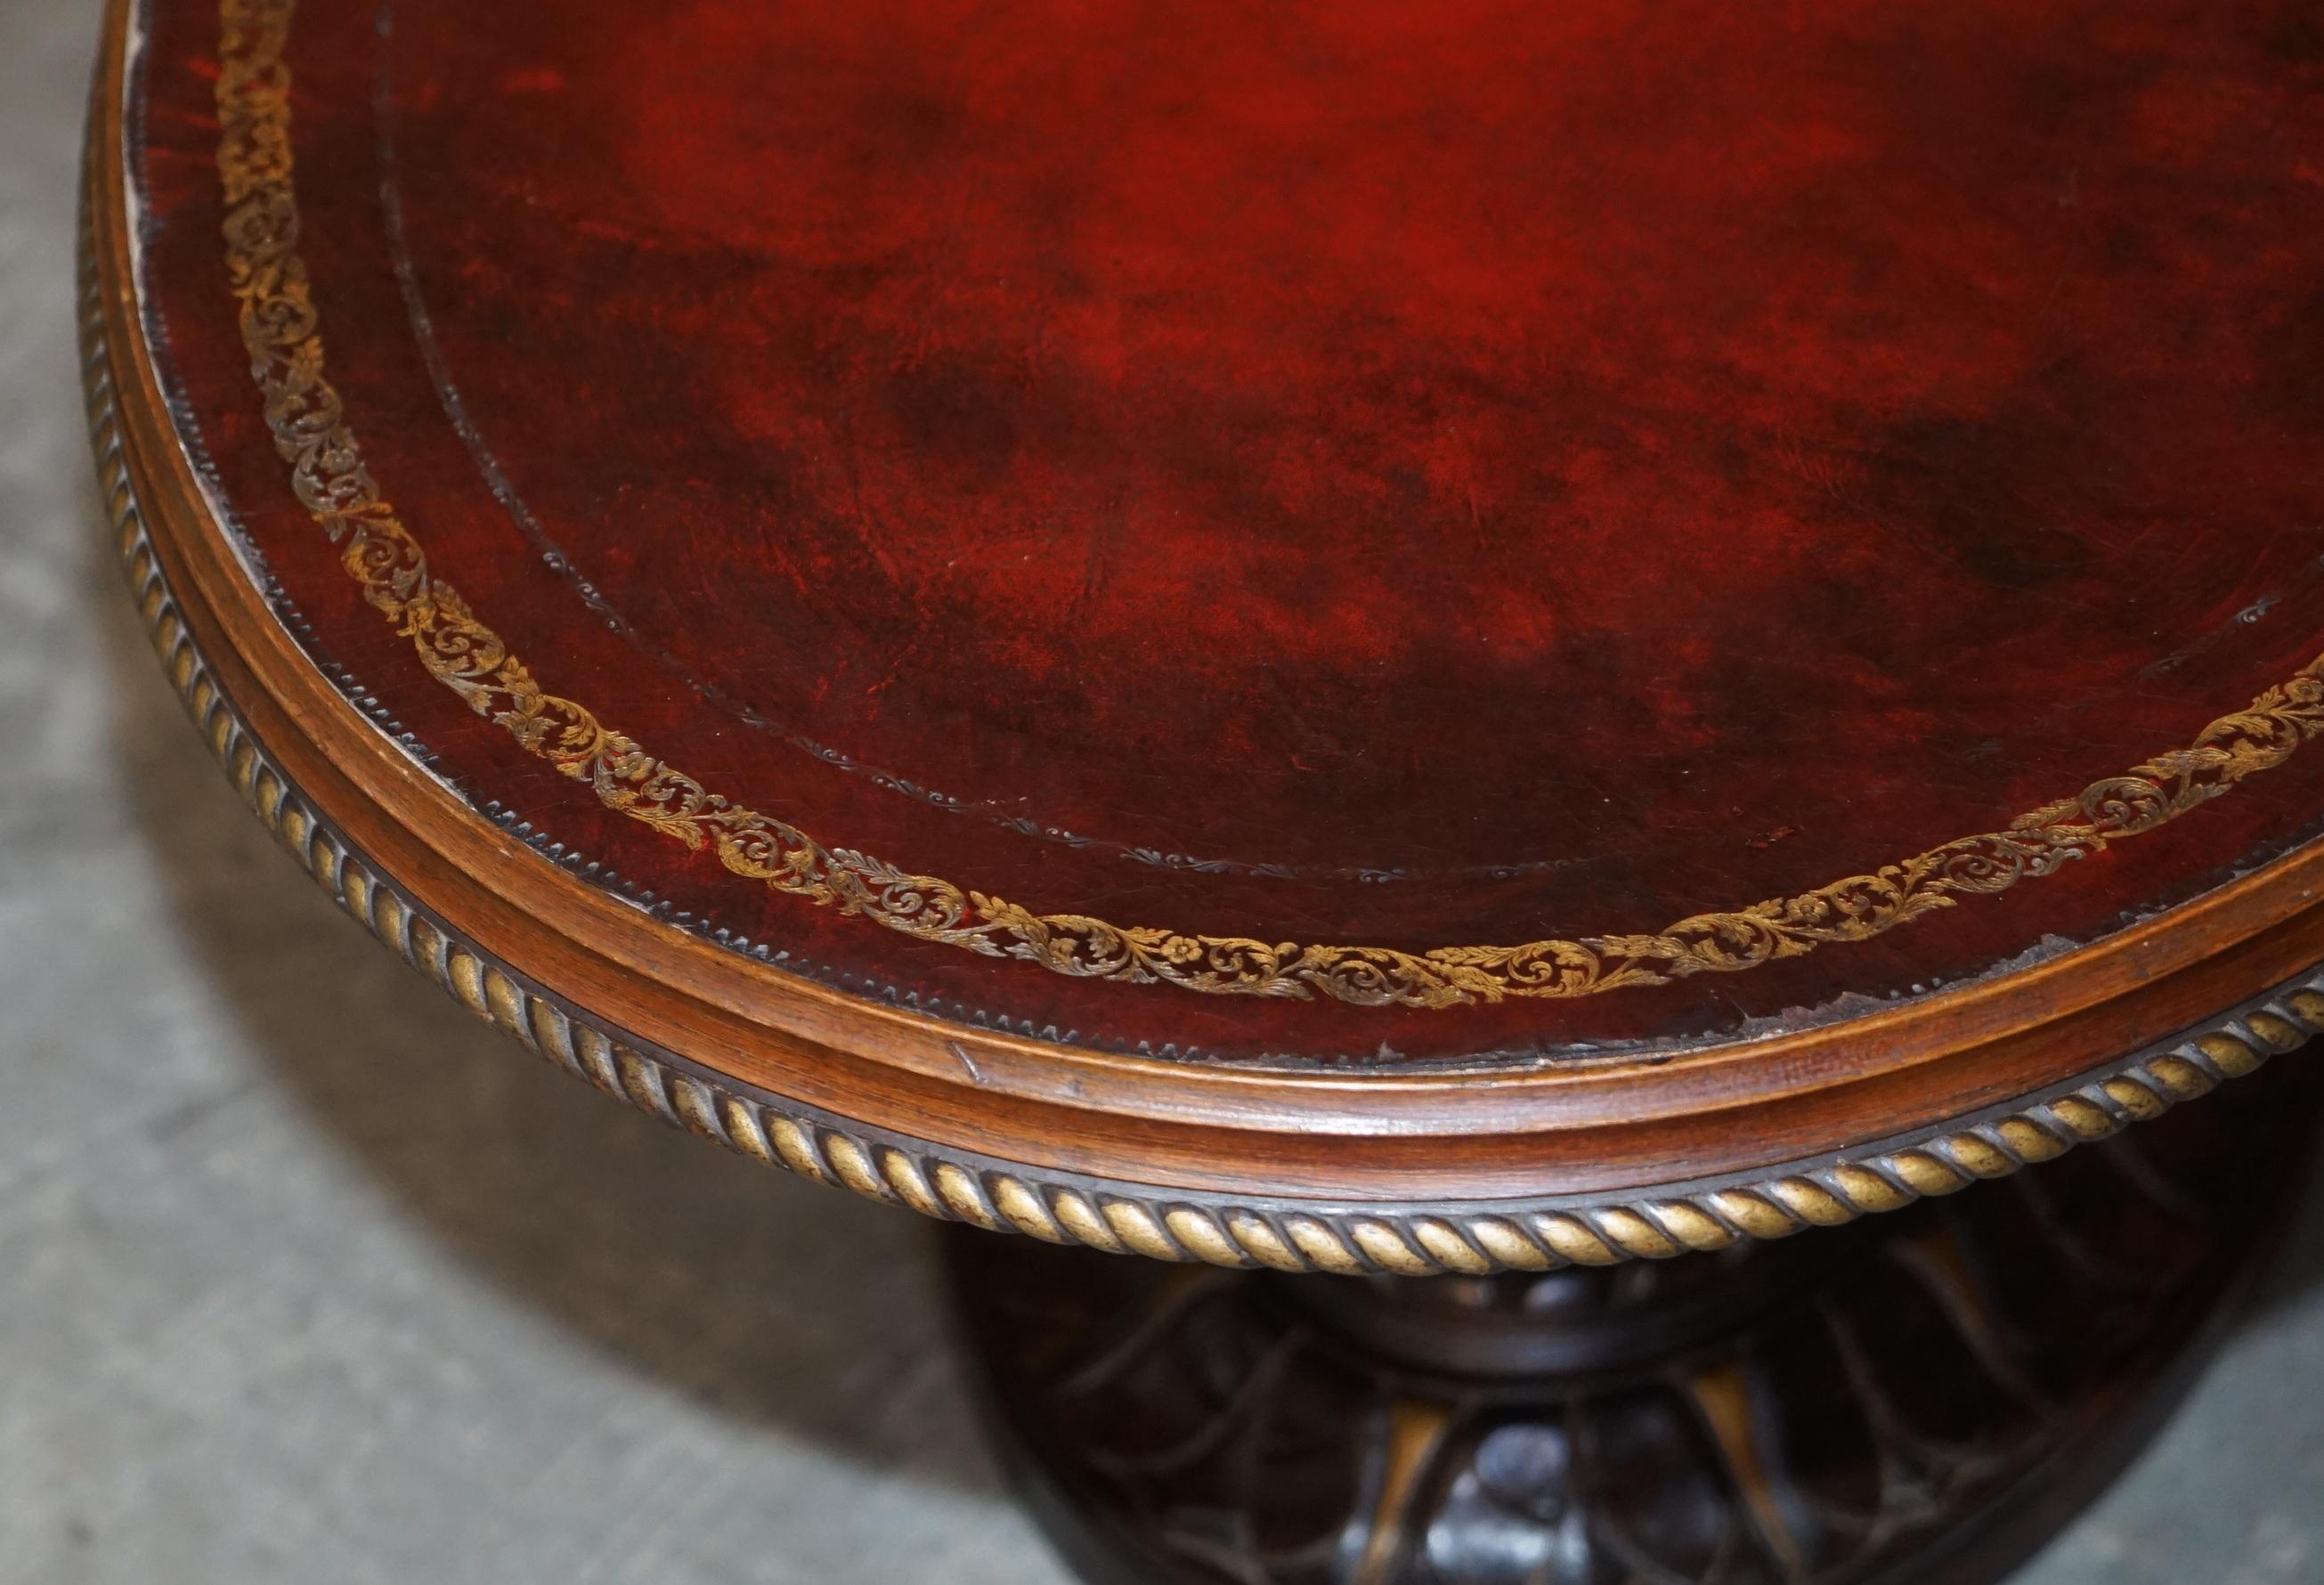 Oxblood Leather Oval Roman Pedestal Base Coffee or Cocktail Table Nice Find 6